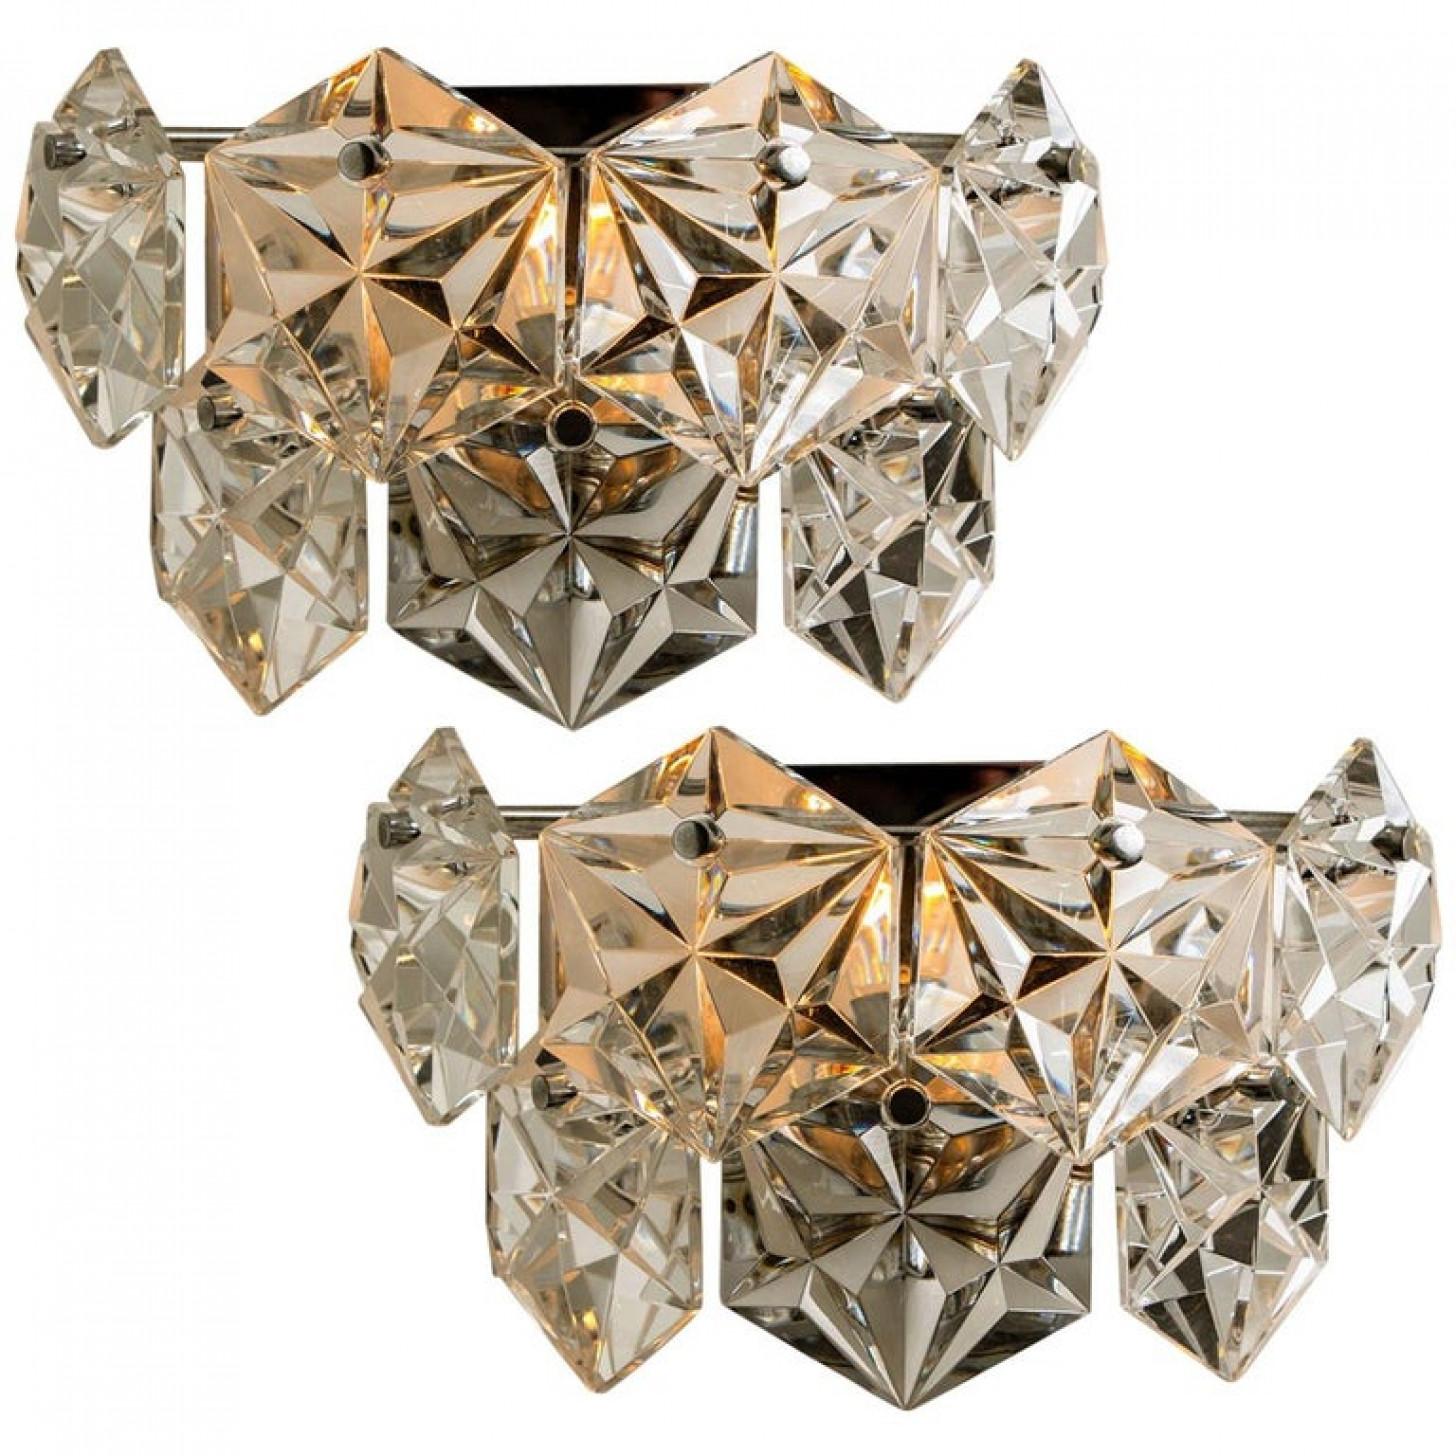 1 of the 4 luxurious of chrome frames and thick diamond crystal sconces by the famed maker, Kinkeldey. Very elegant light fixtures, comfortable with all decor periods. The crystals are meticulously cut in such a way that radiate the light of the